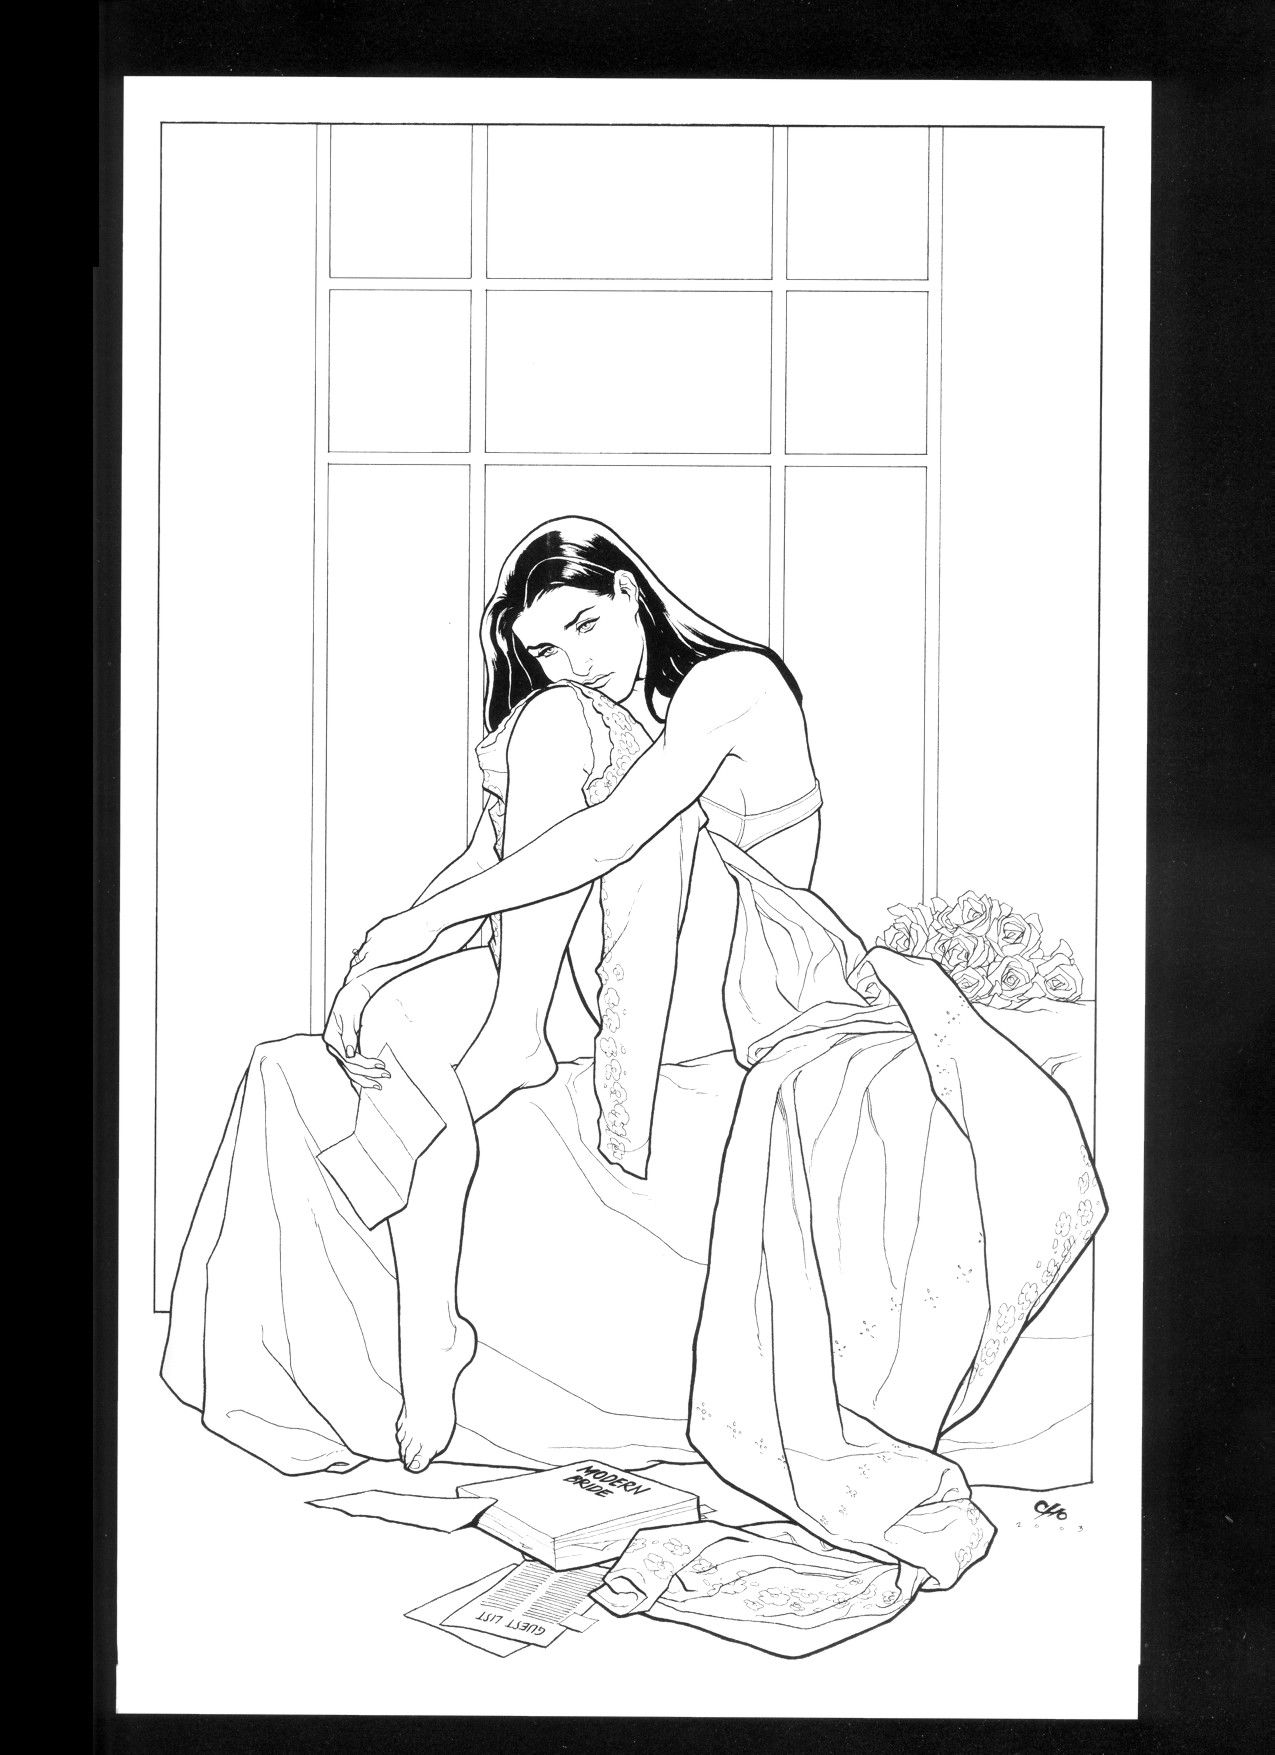 [Frank Cho] Women - Selected Drawings and Illustrations 64